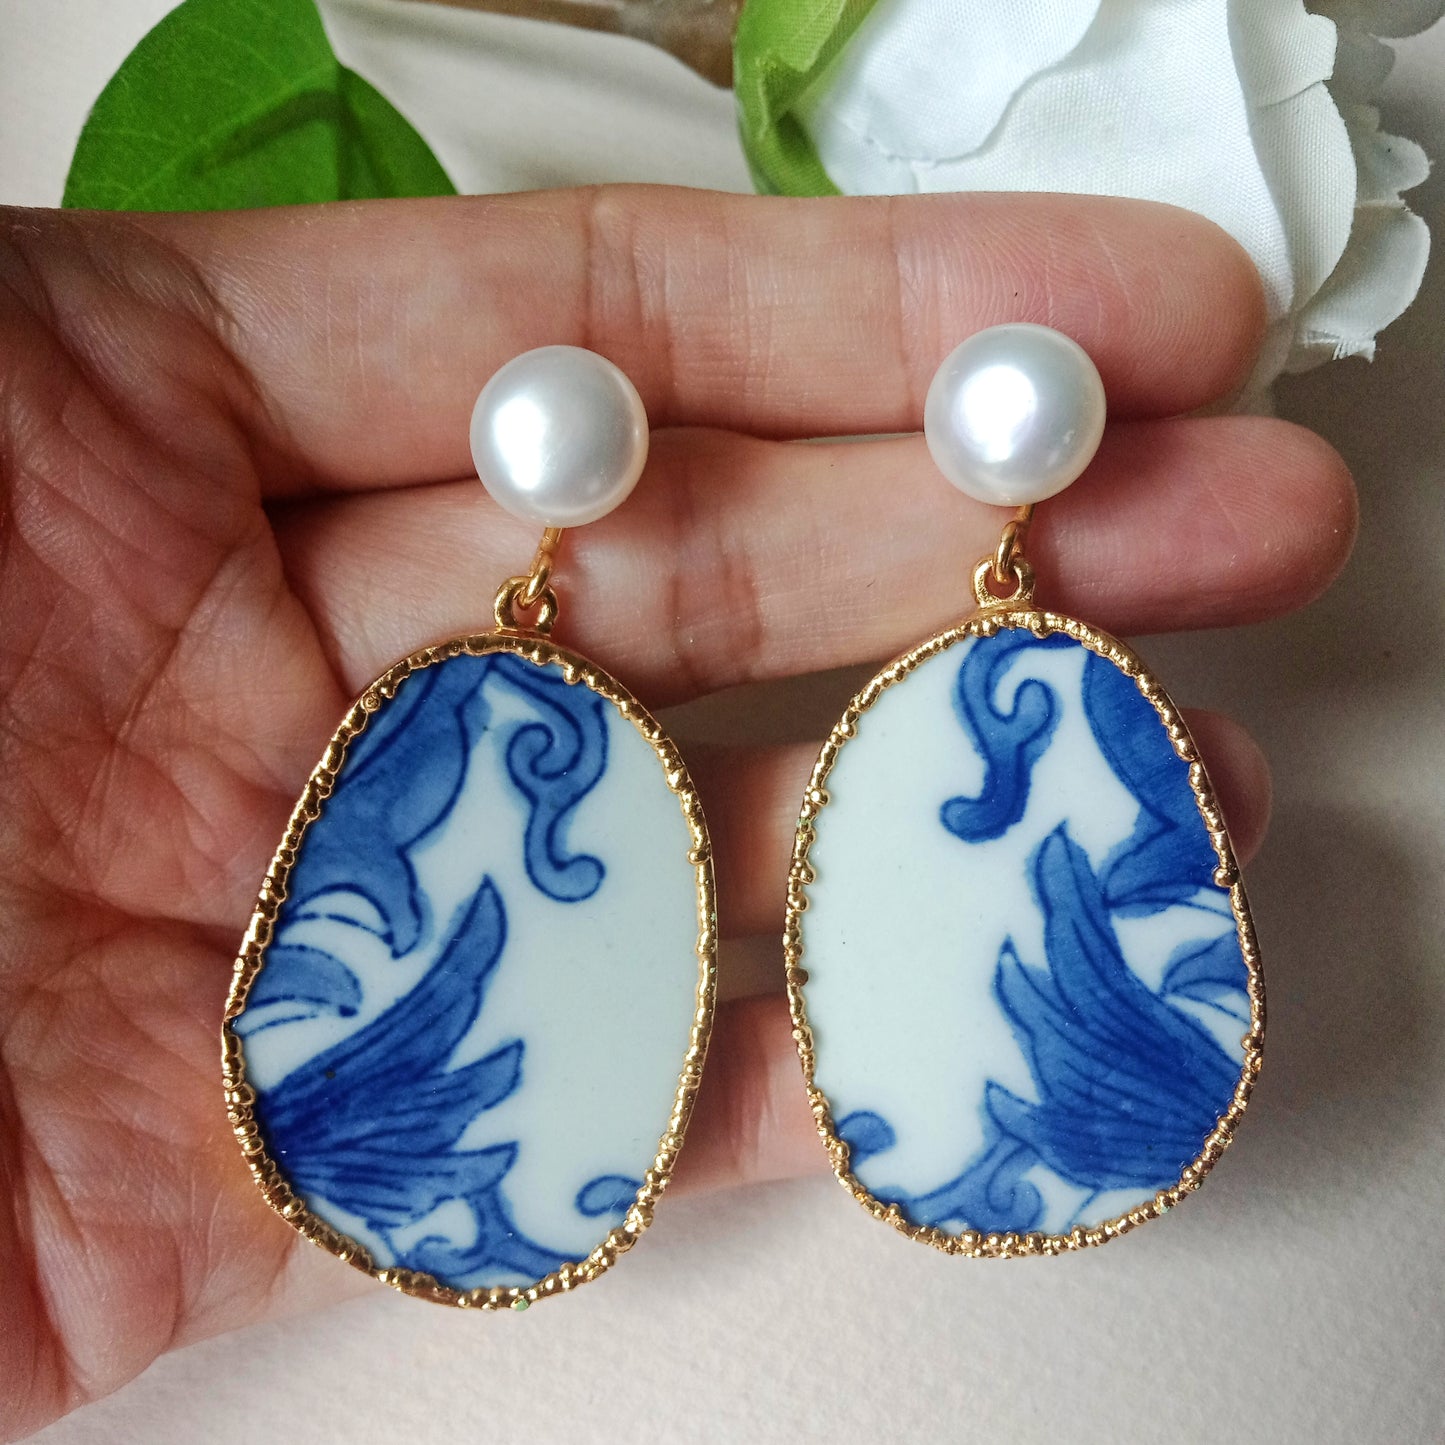 Lacy blue and white porcelain earrings with FW pearls